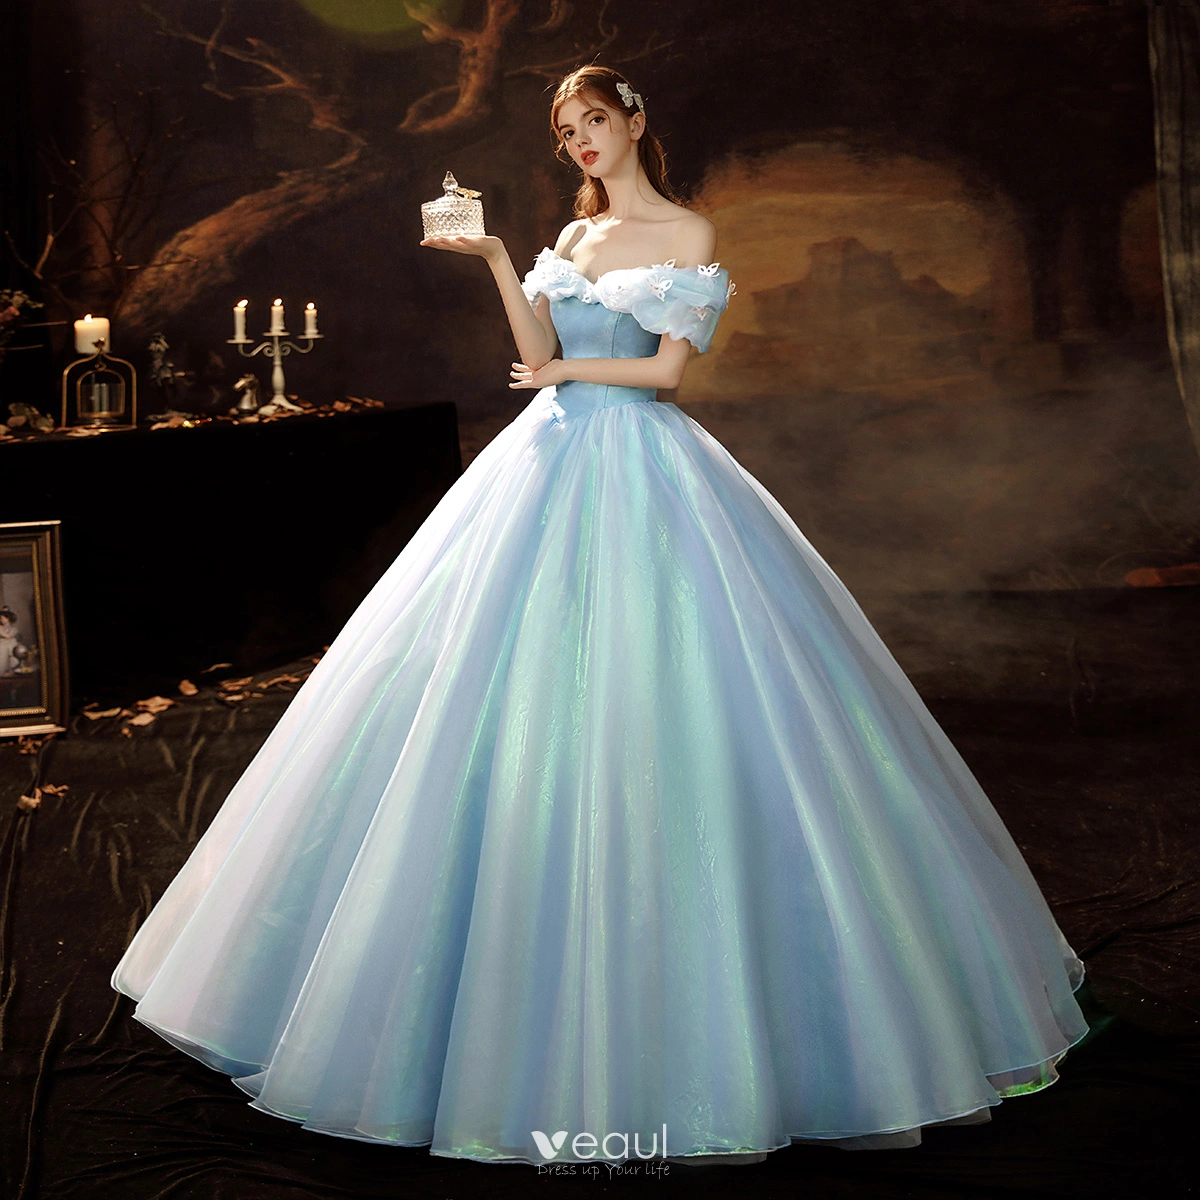 Blue Butterfly Gown – Liylah